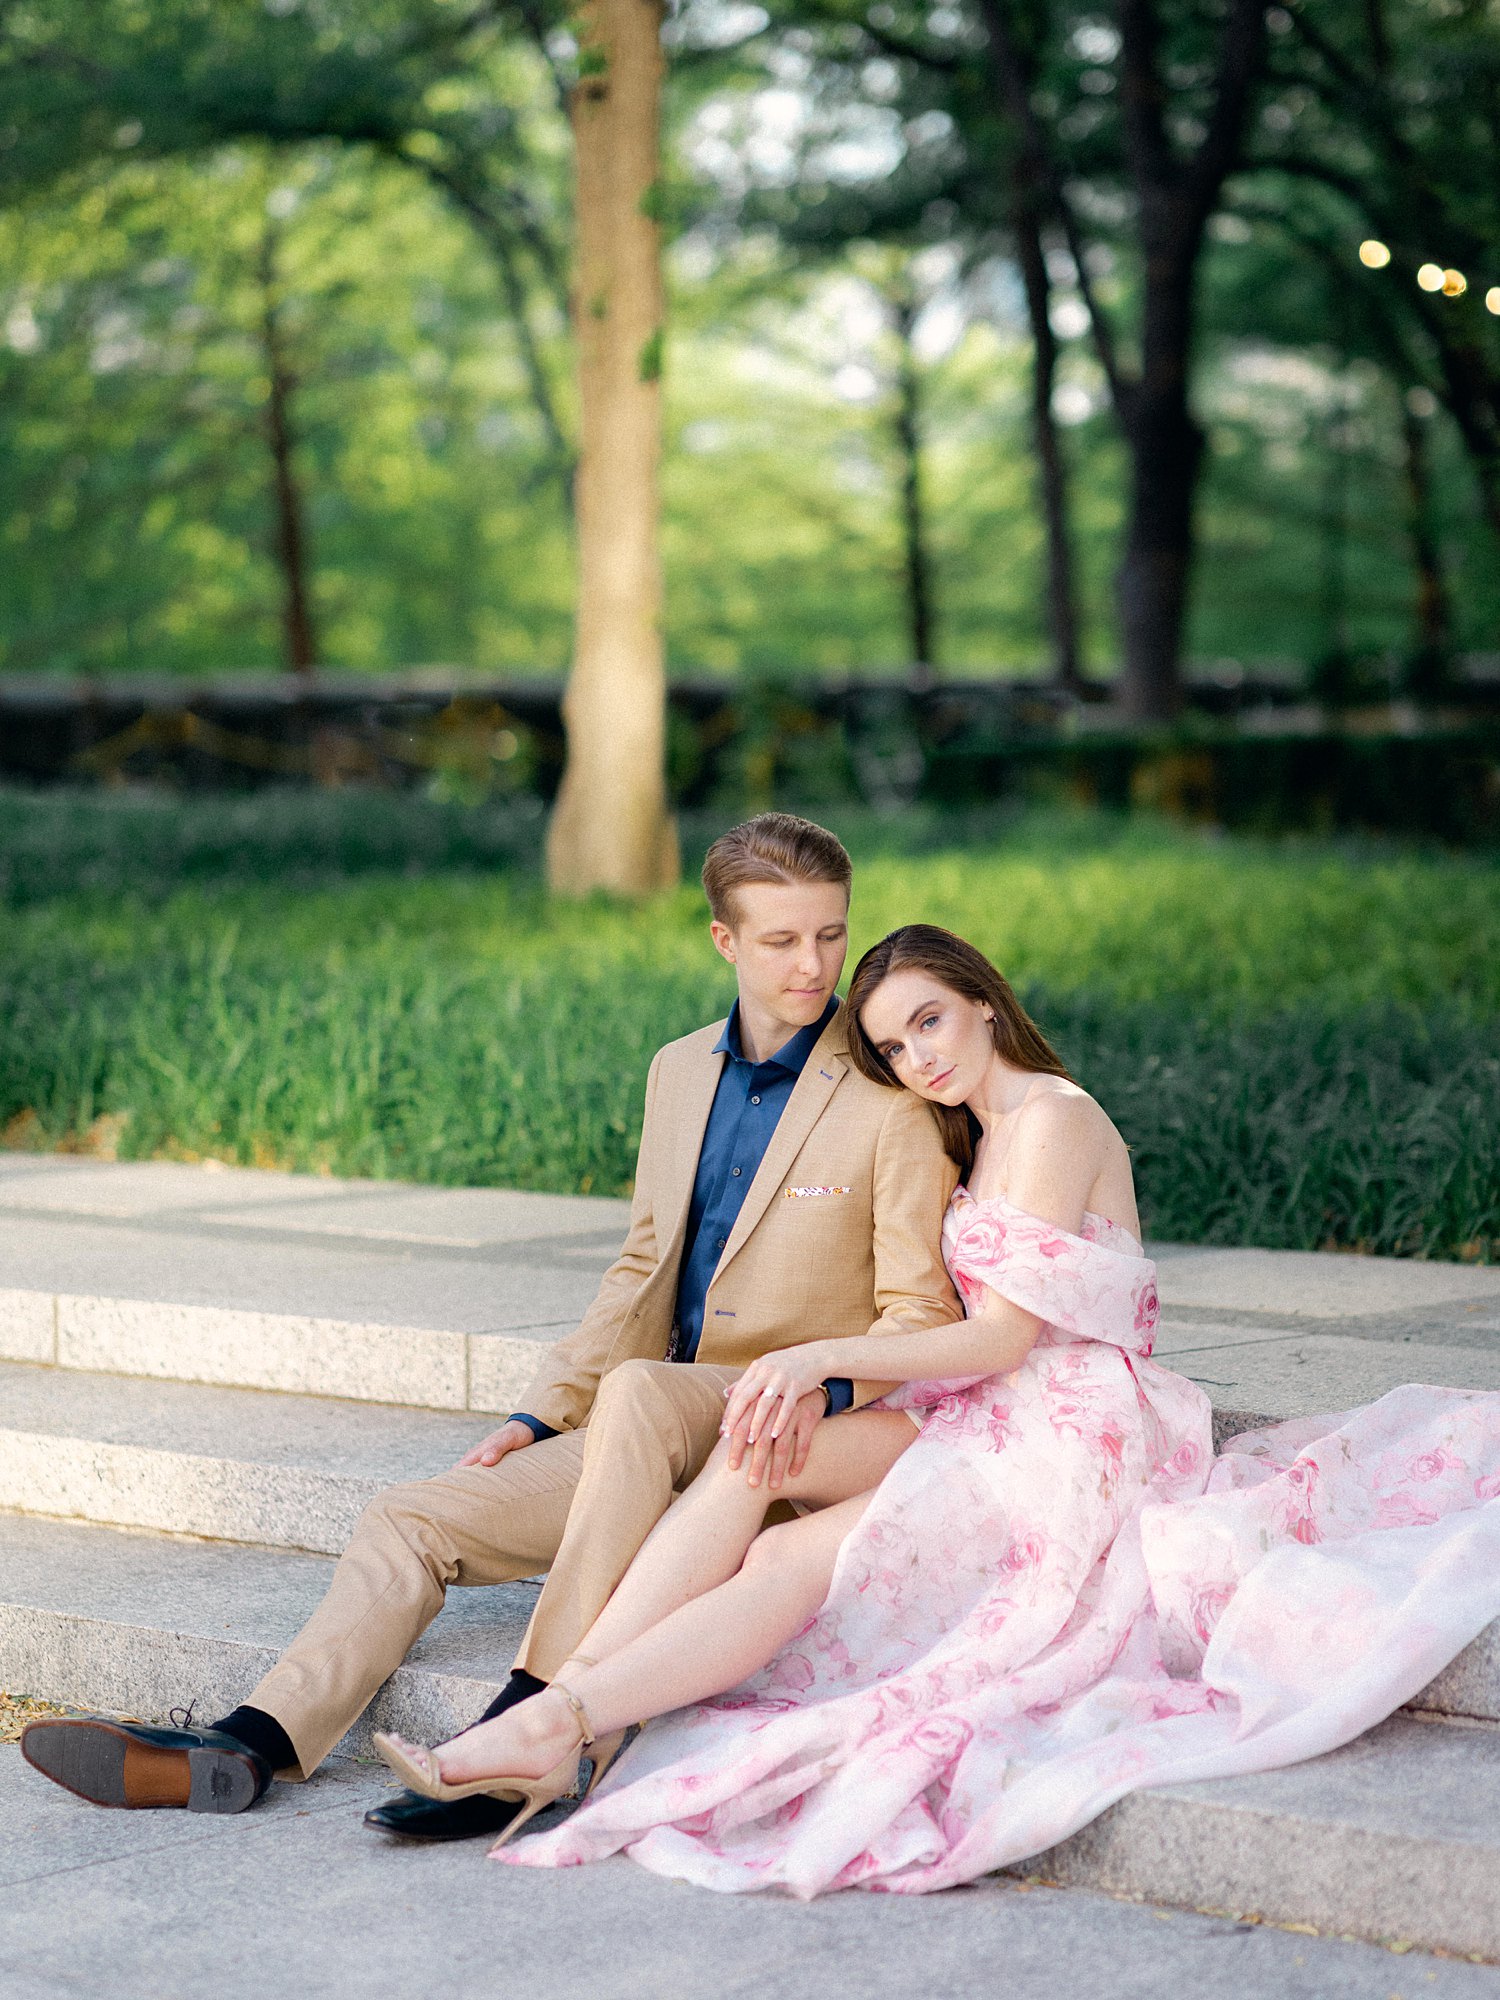 smiling woman in Pink floral gown sitting with man in tan suite and blue shirt dallas garden engagement